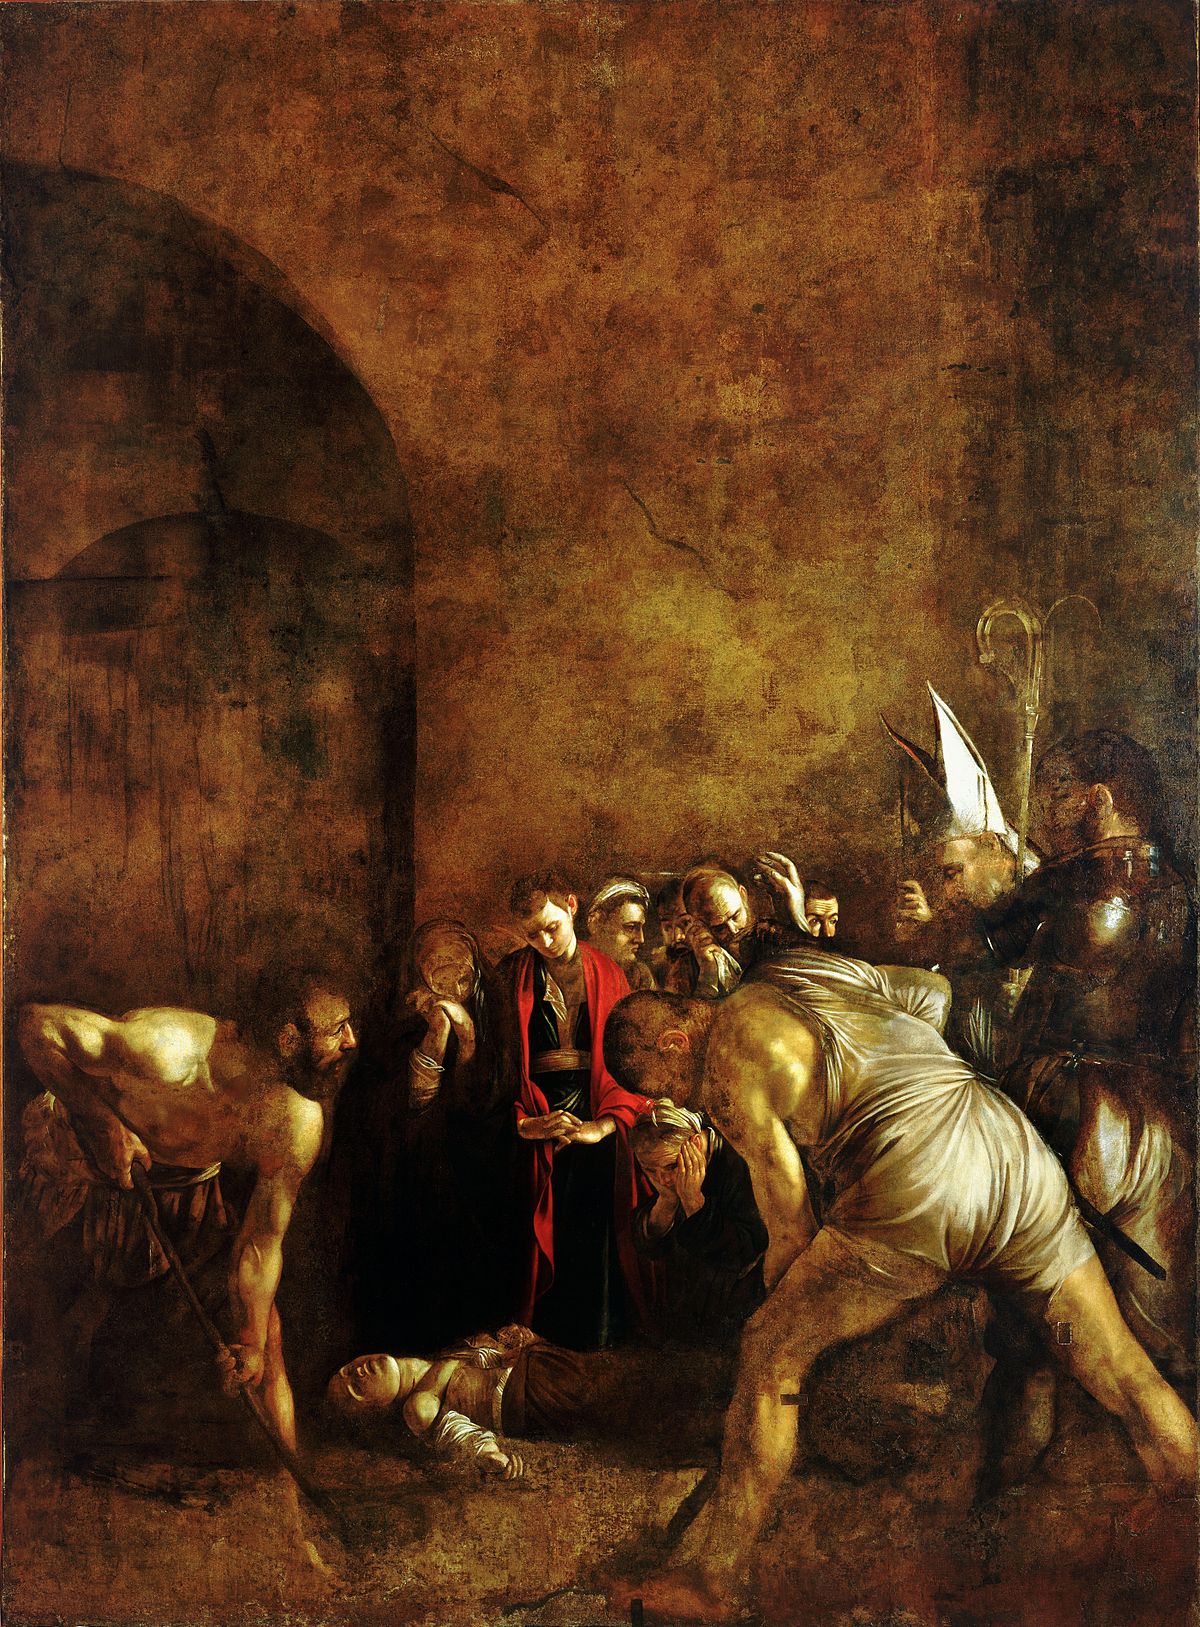 Burial of Saint Lucy, 1608 by Caravaggio